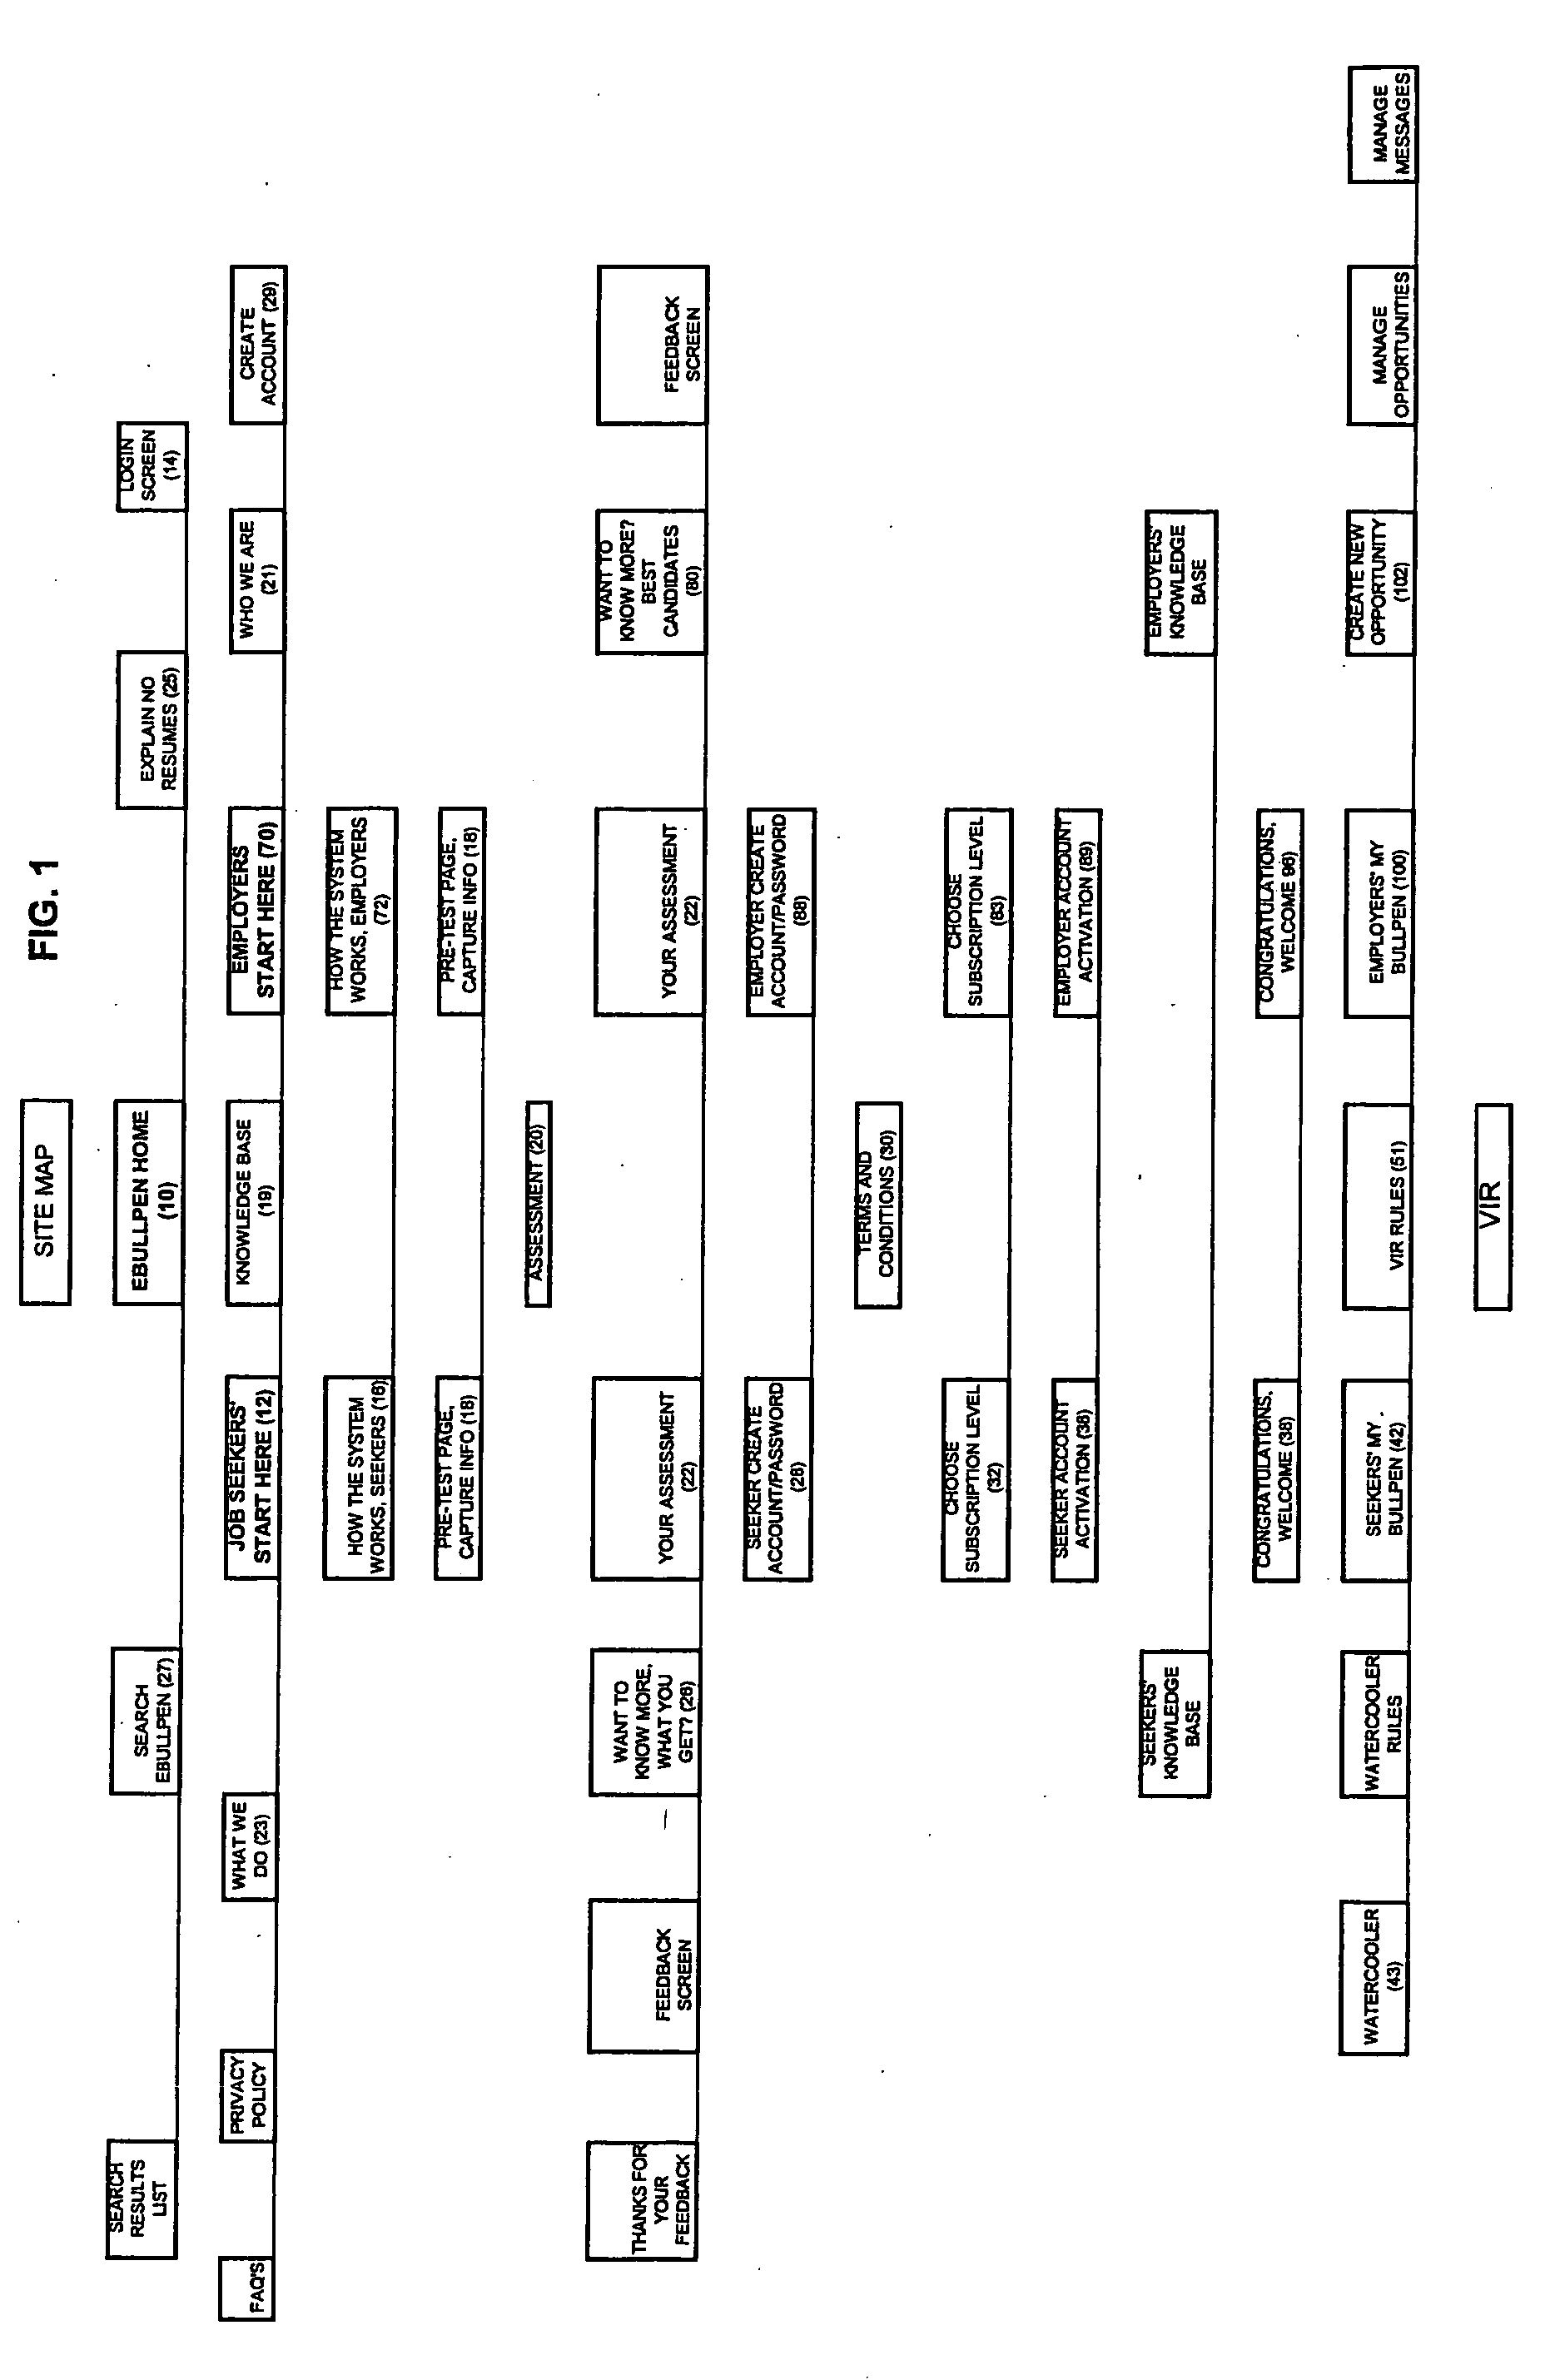 Method and system for making connections between job seekers and employers